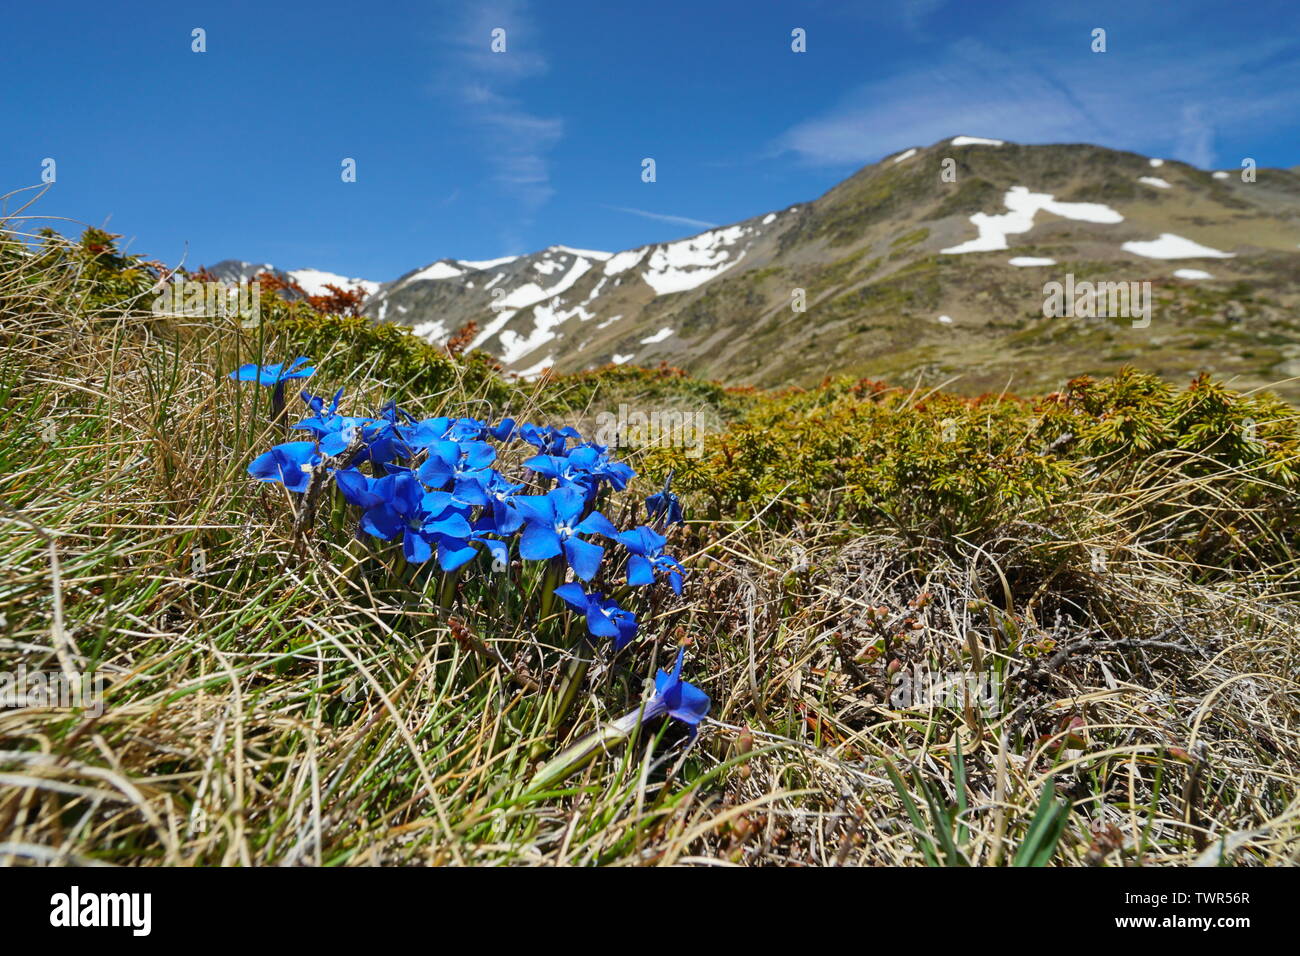 Spring gentians blue flowers (Gentiana verna) in the mountains, France, natural park of the Catalan Pyrenees Stock Photo